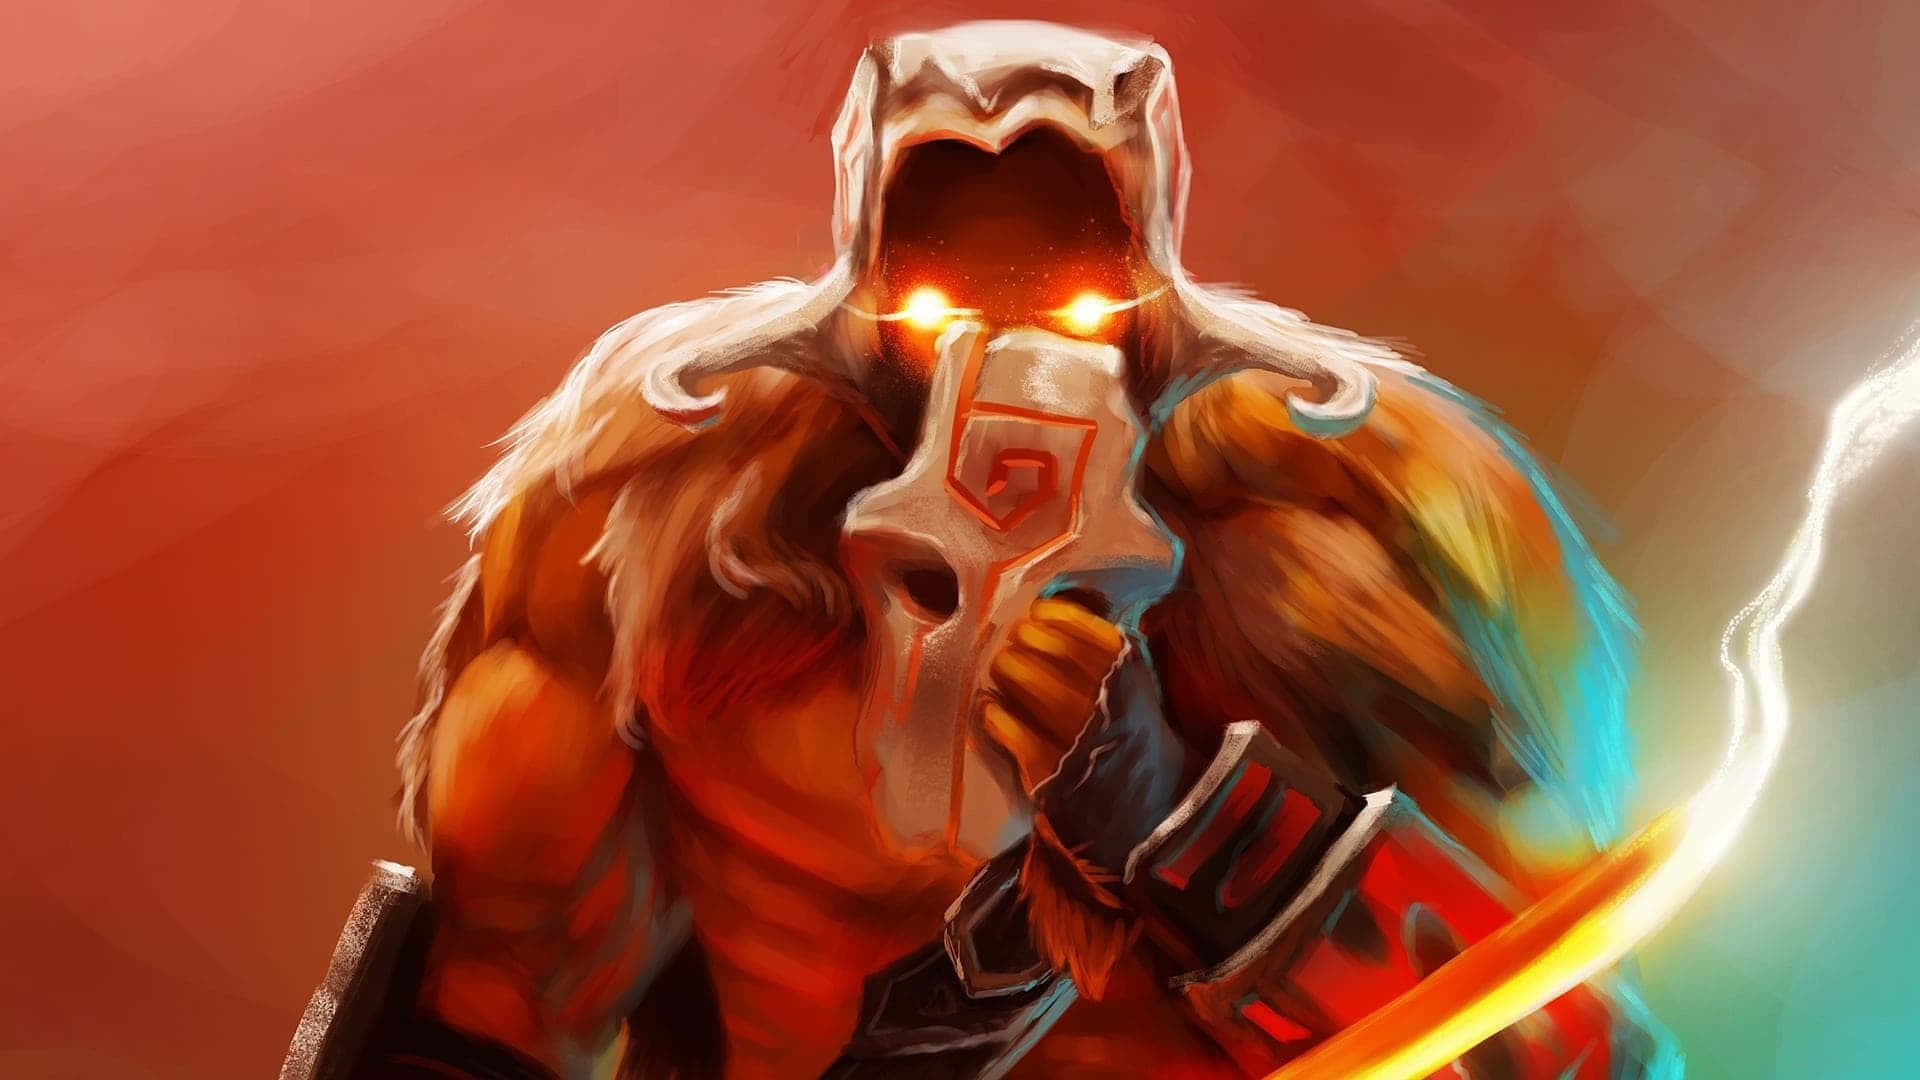 Join The Juggernaut in Dota 2 - A Fearsome Display of Power Wallpaper